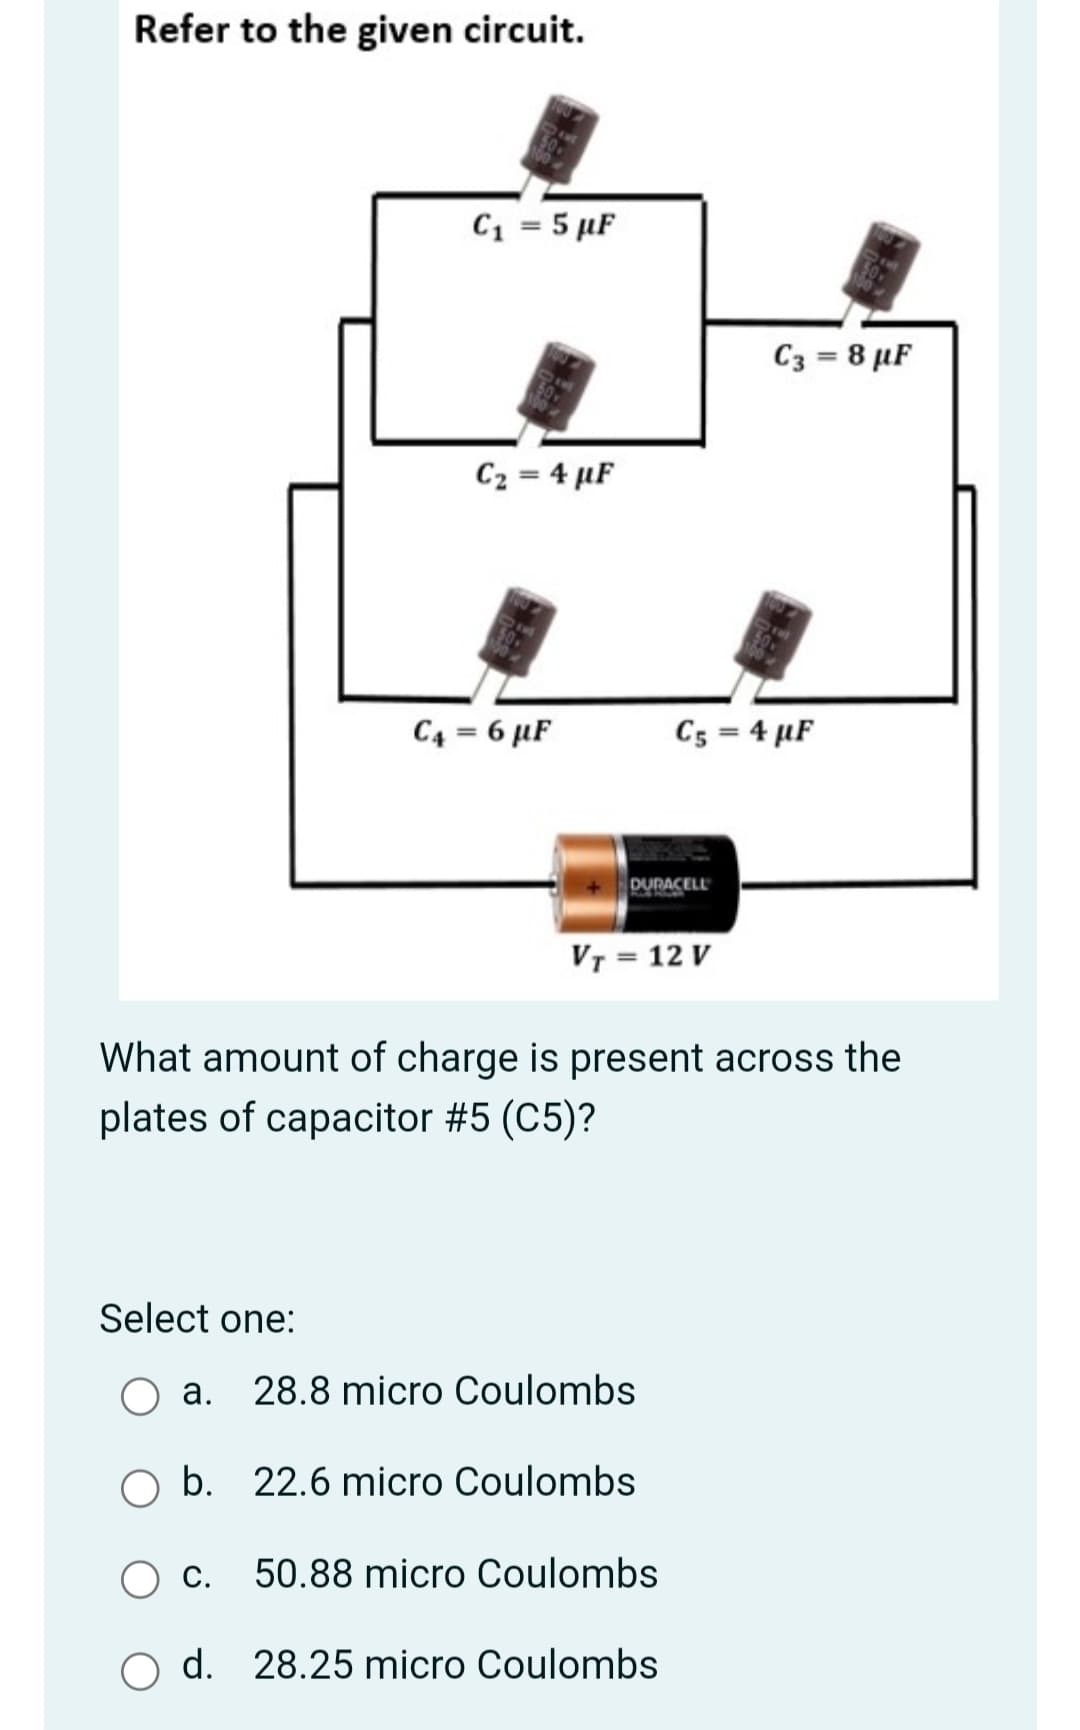 Refer to the given circuit.
C1 = 5 µF
C3 = 8 µF
C2 = 4 µF
C4 = 6 µF
C5 = 4 µF
DURACELL
VT = 12 V
What amount of charge is present across the
plates of capacitor #5 (C5)?
Select one:
a. 28.8 micro Coulombs
O b. 22.6 micro Coulombs
С.
50.88 micro Coulombs
d. 28.25 micro Coulombs
